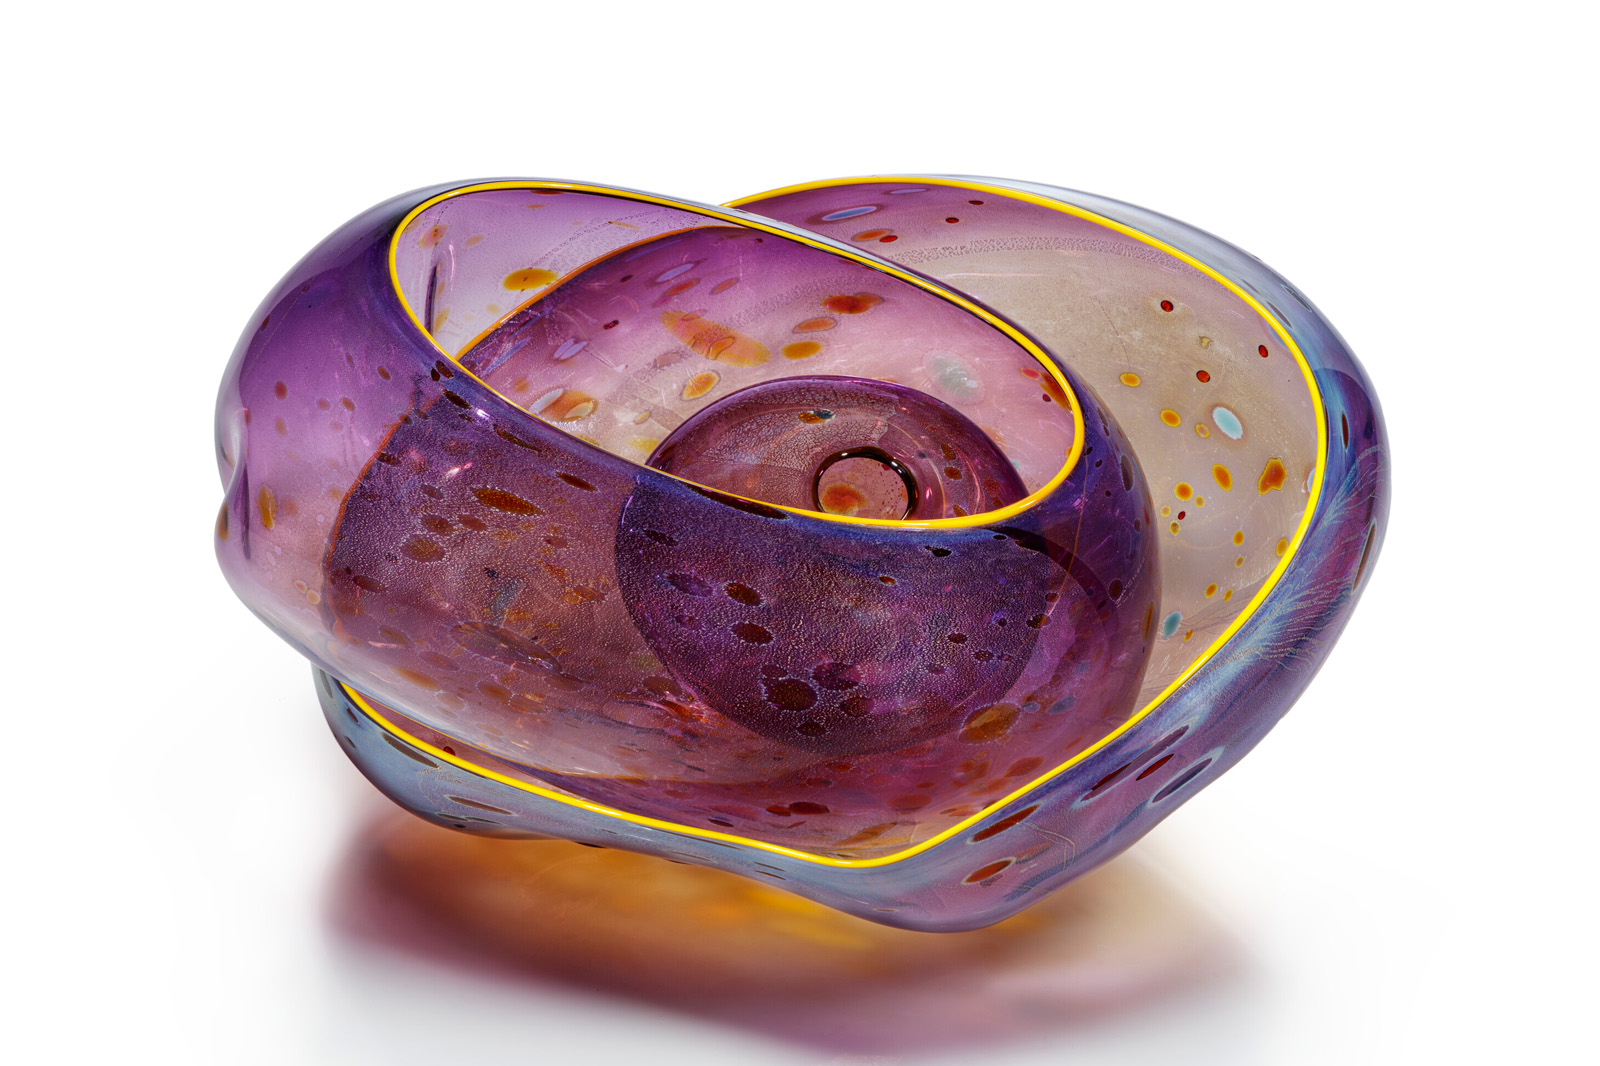 Dale Chihuly, Purple Spotted Basket Set with Yellow Lip Wraps, 1993